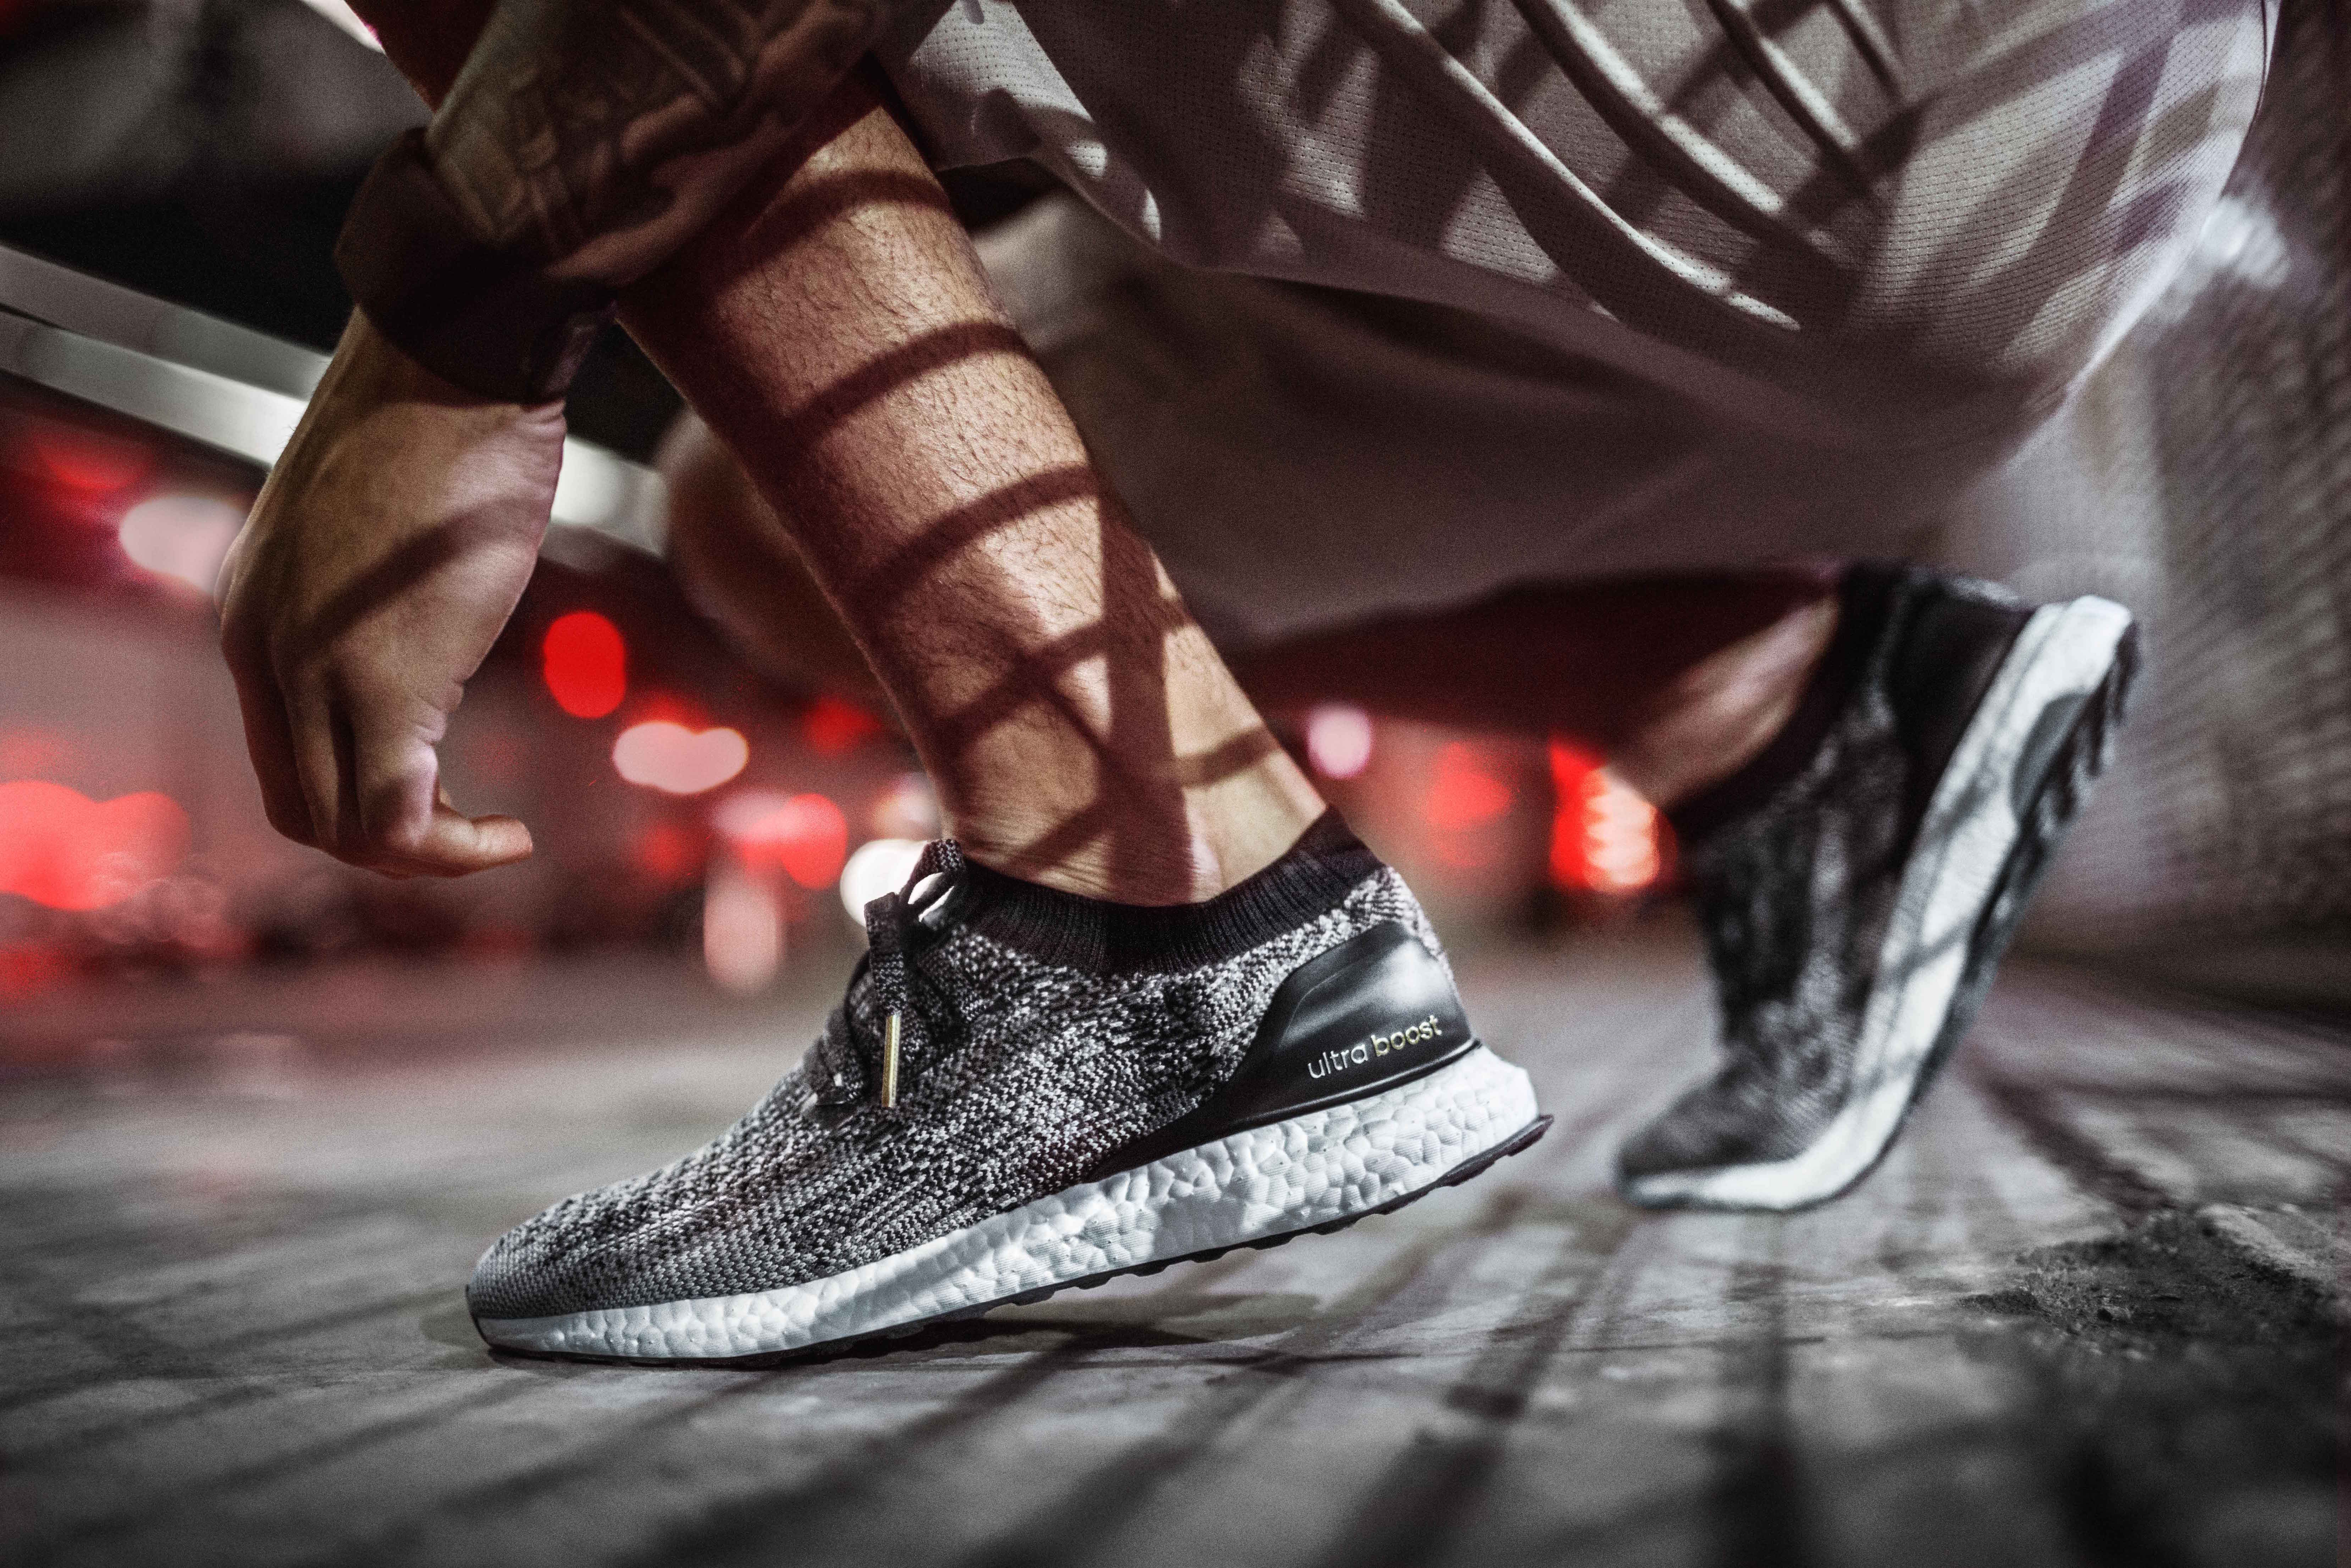 The New Adidas ultraBOOST Uncaged Is Pretty Badass